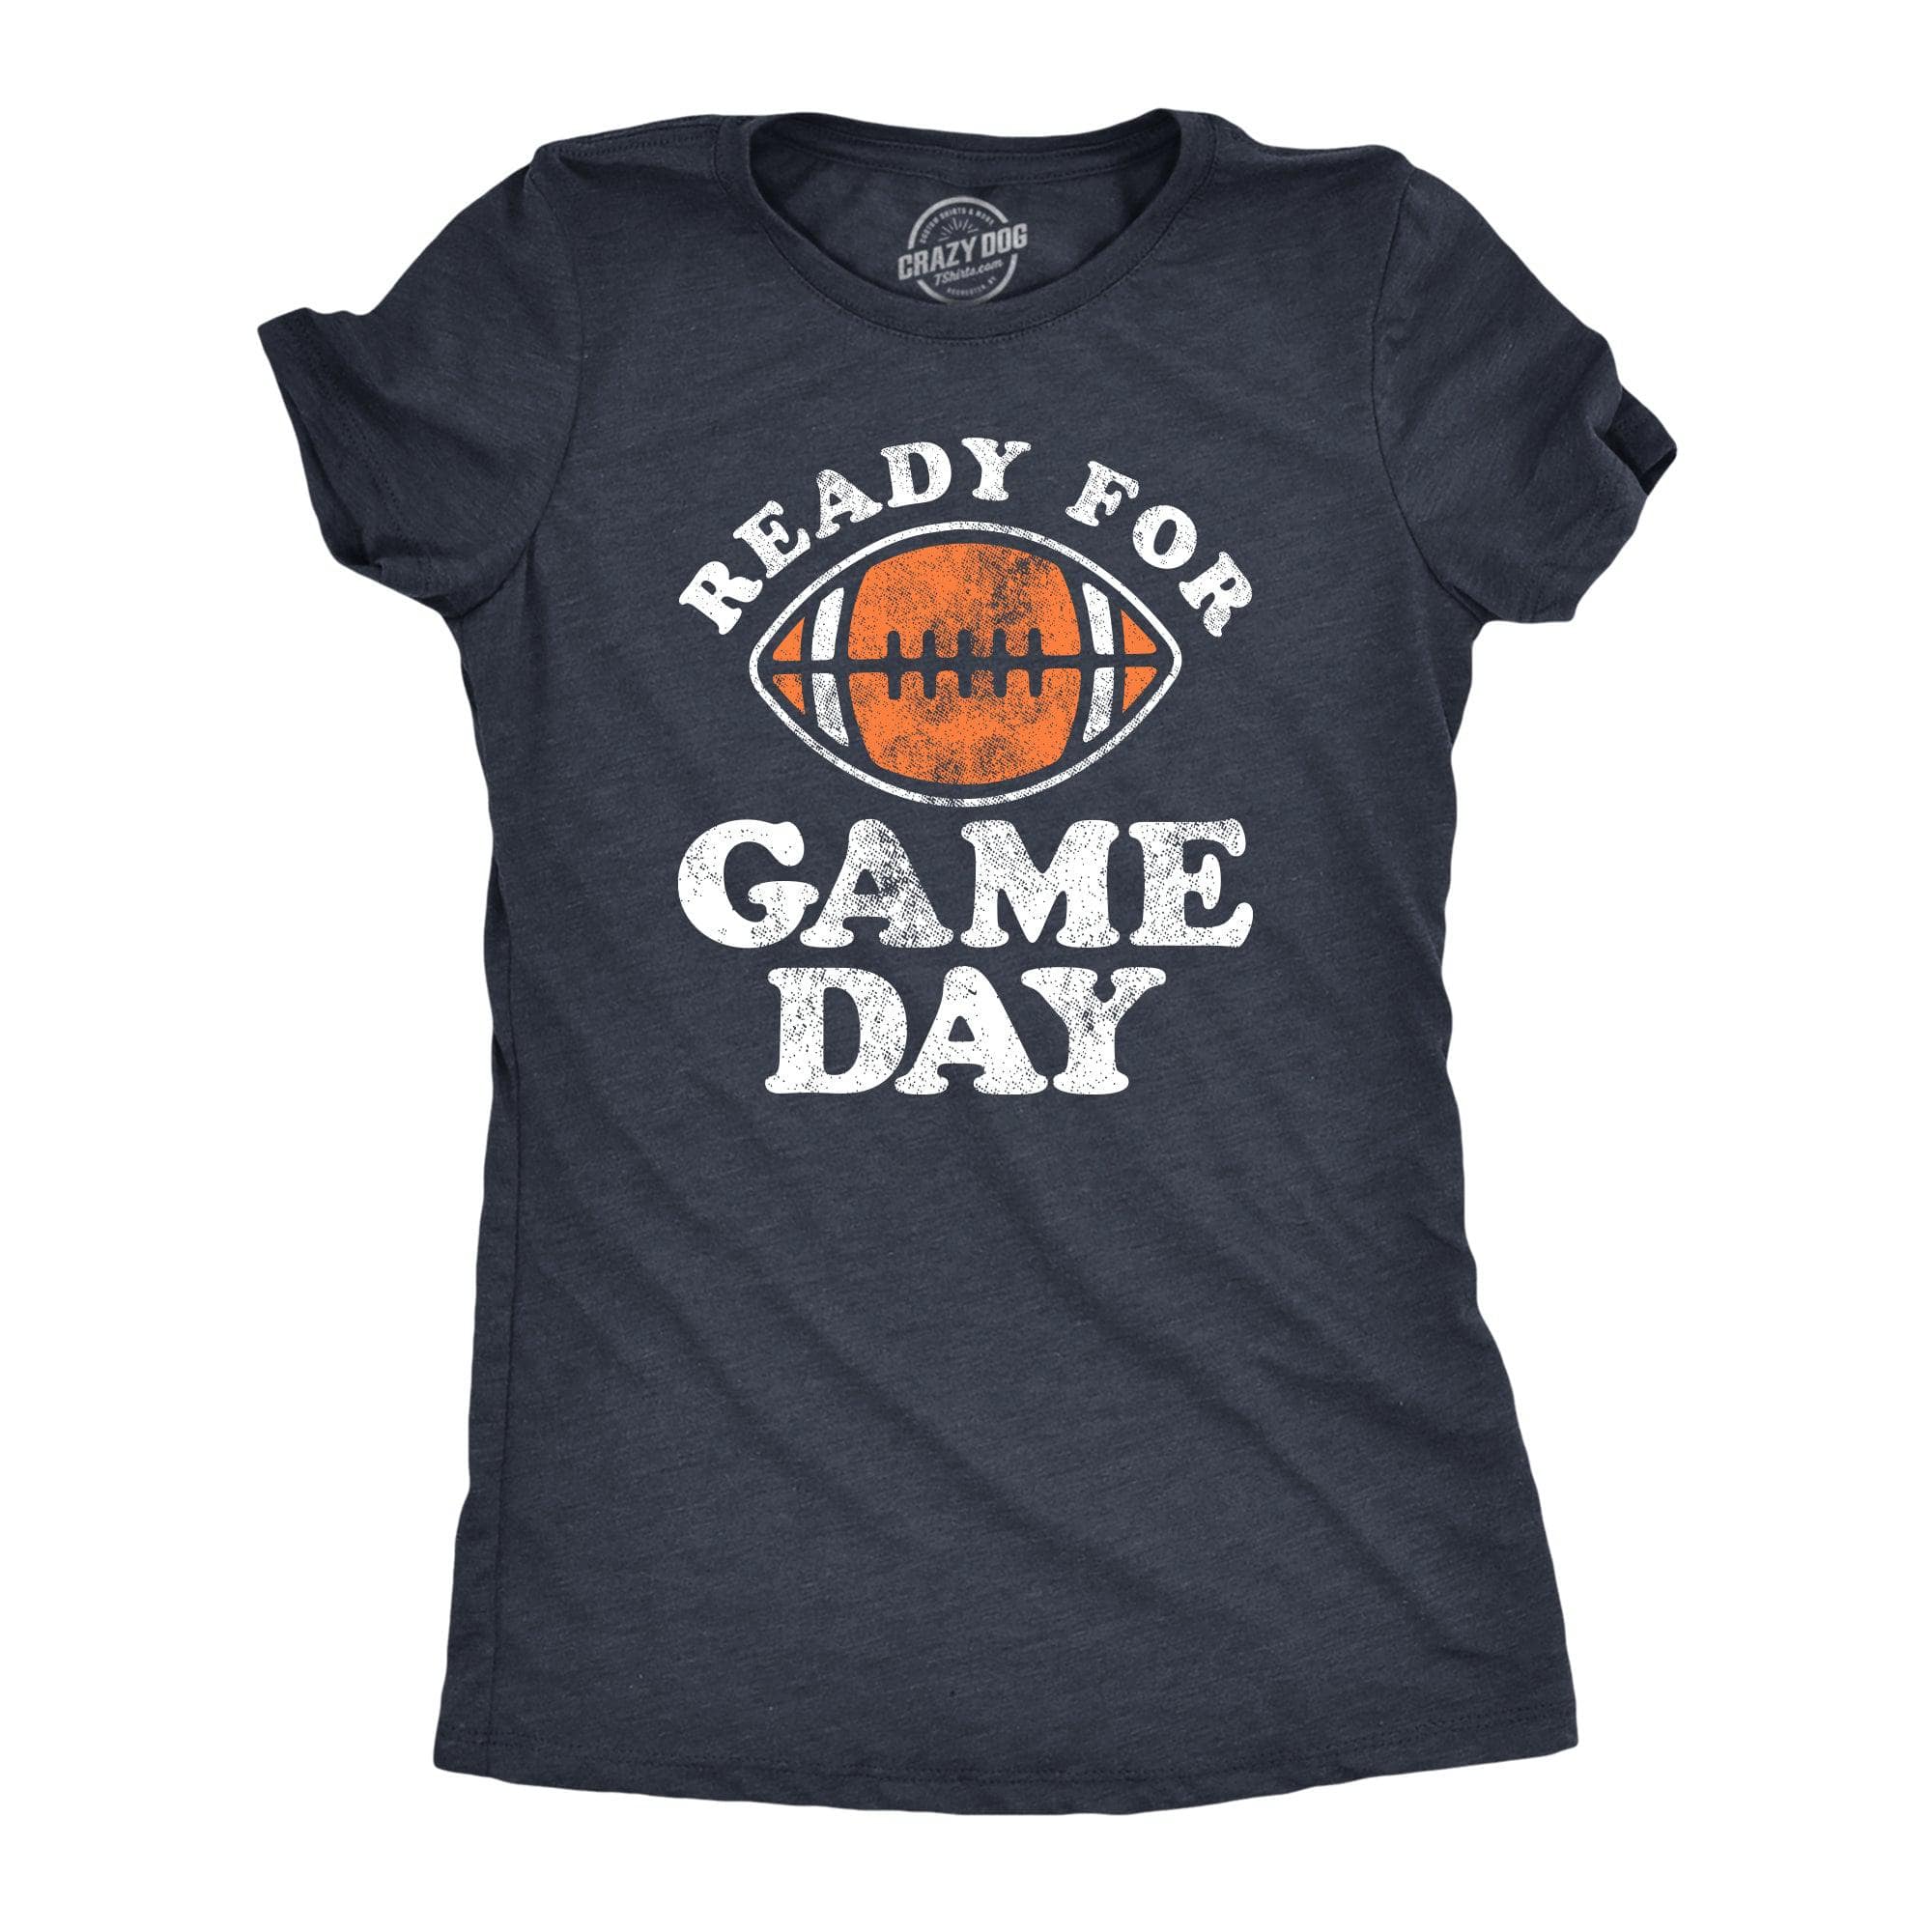 Ready For Game Day Women's Tshirt  -  Crazy Dog T-Shirts